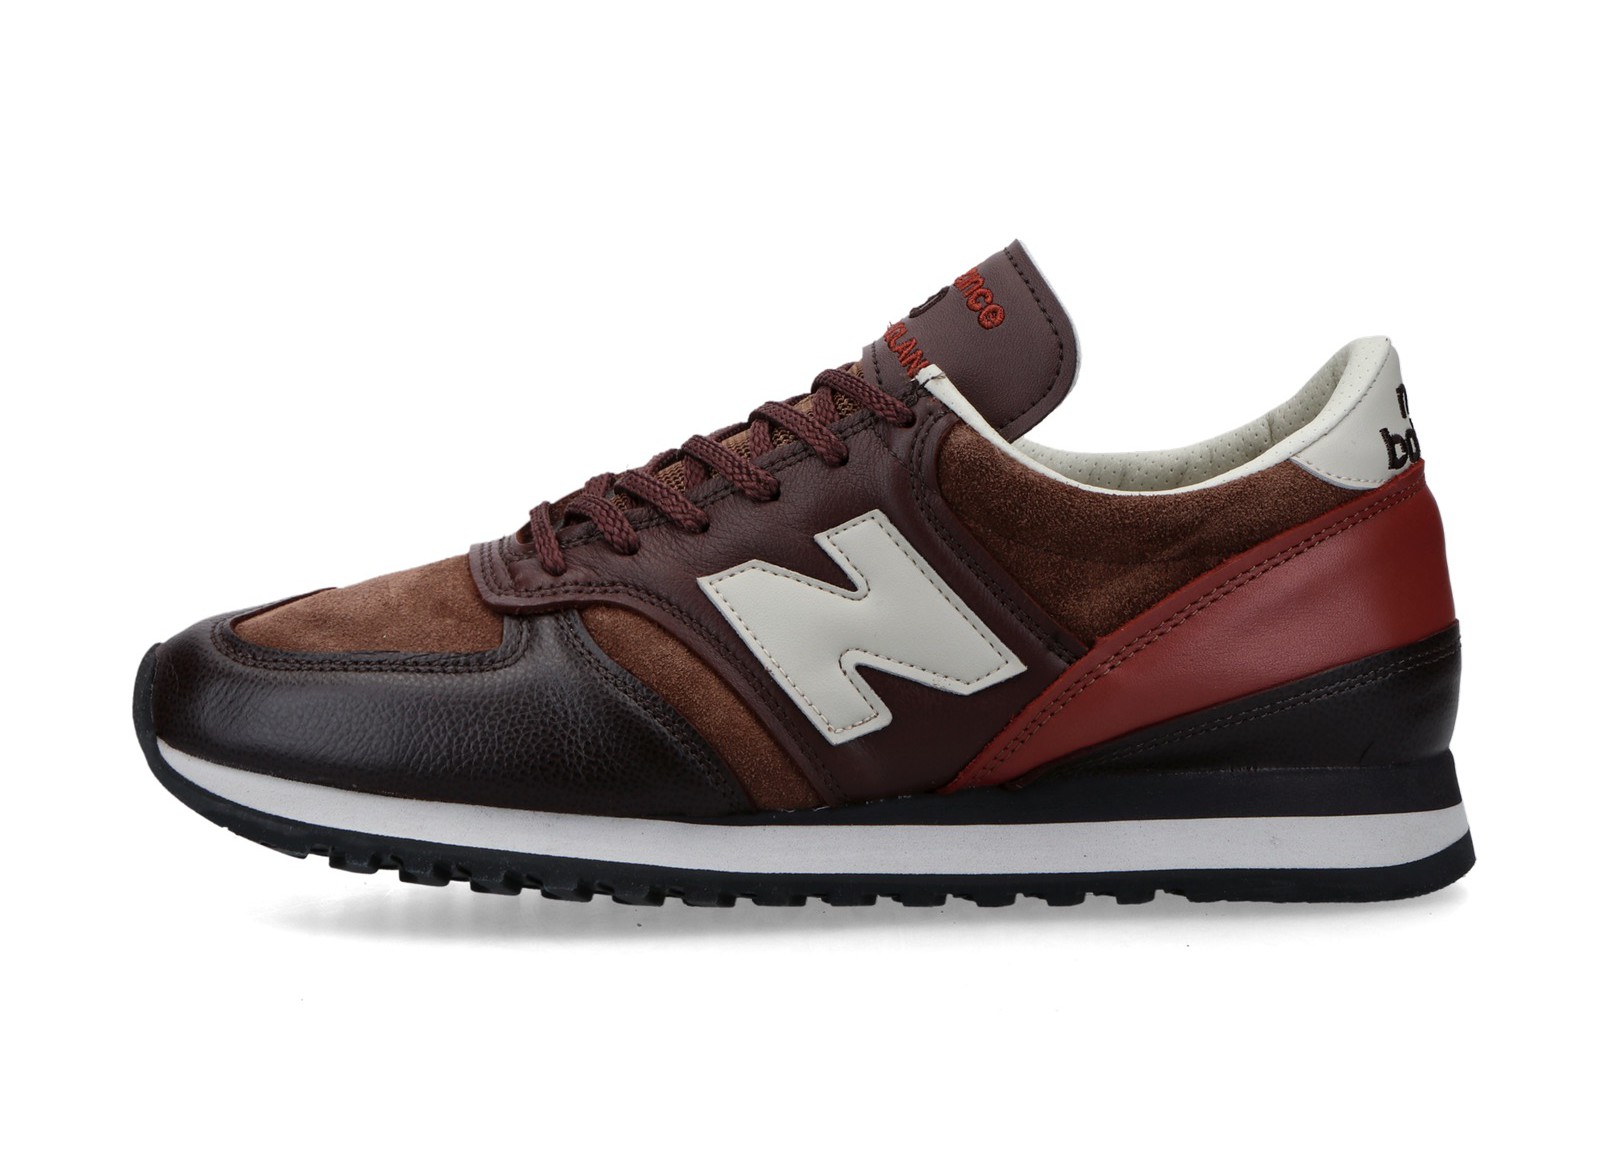 New Balance M730GBI
Made In England
French Roast